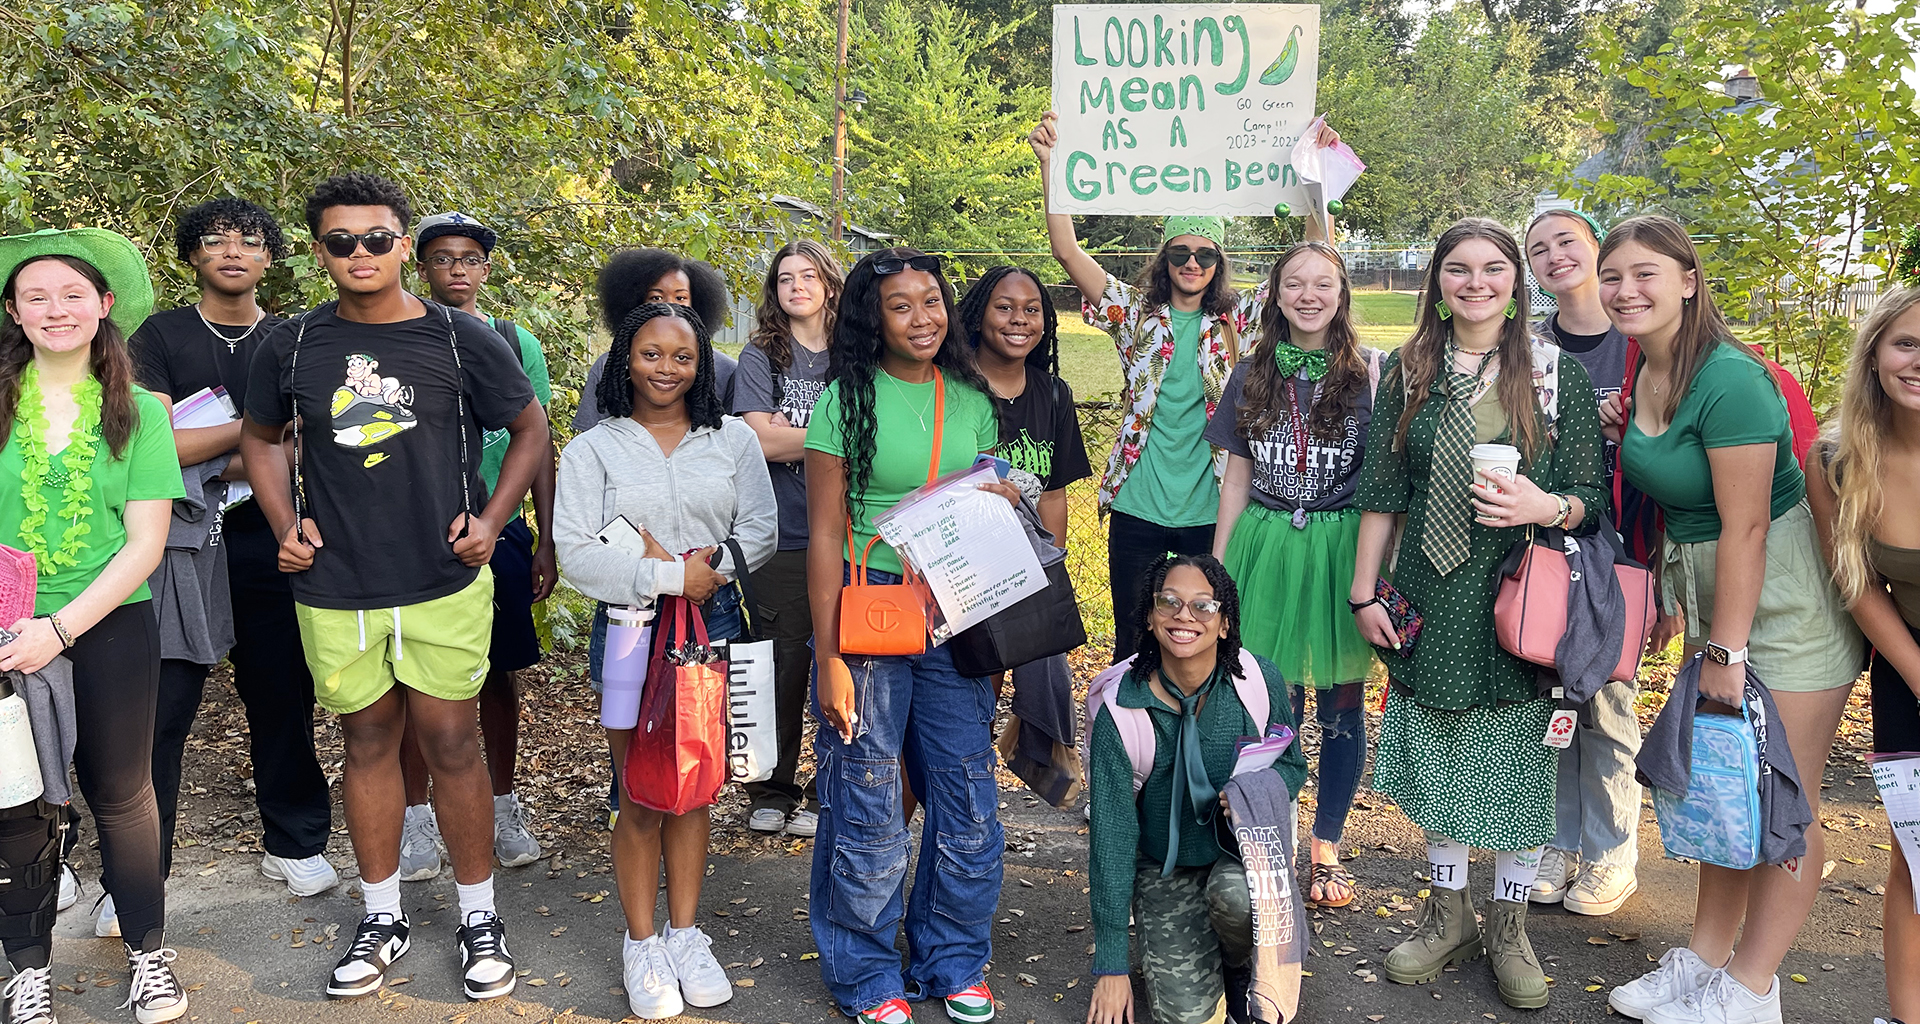 Large group of students dressed in green coming into the school on their first day.